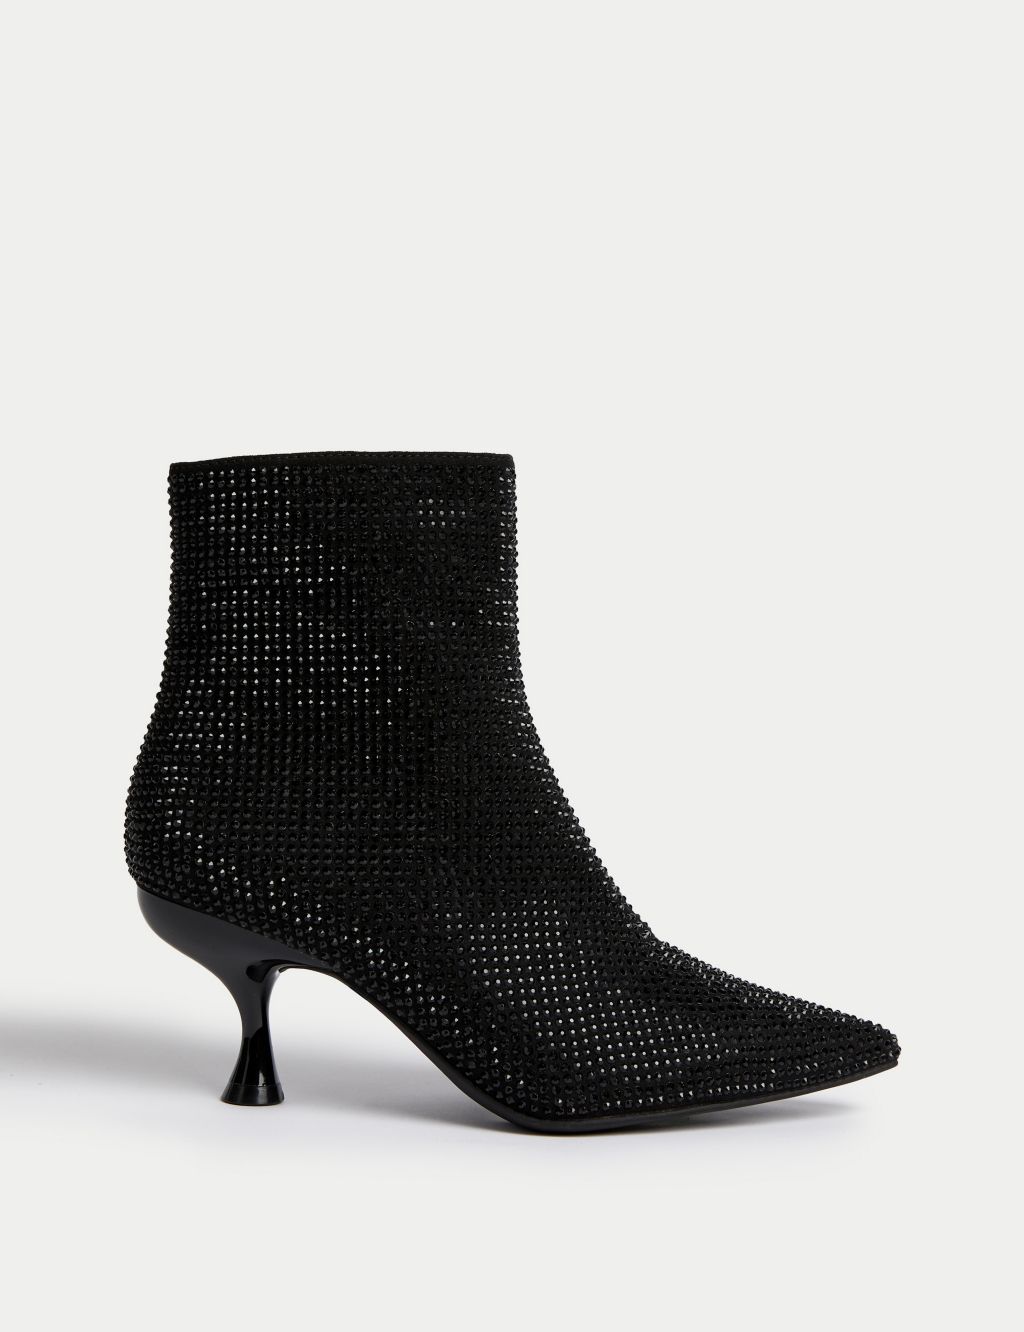 Wide Fit Sparkle Kitten Heel Ankle Boots image 1